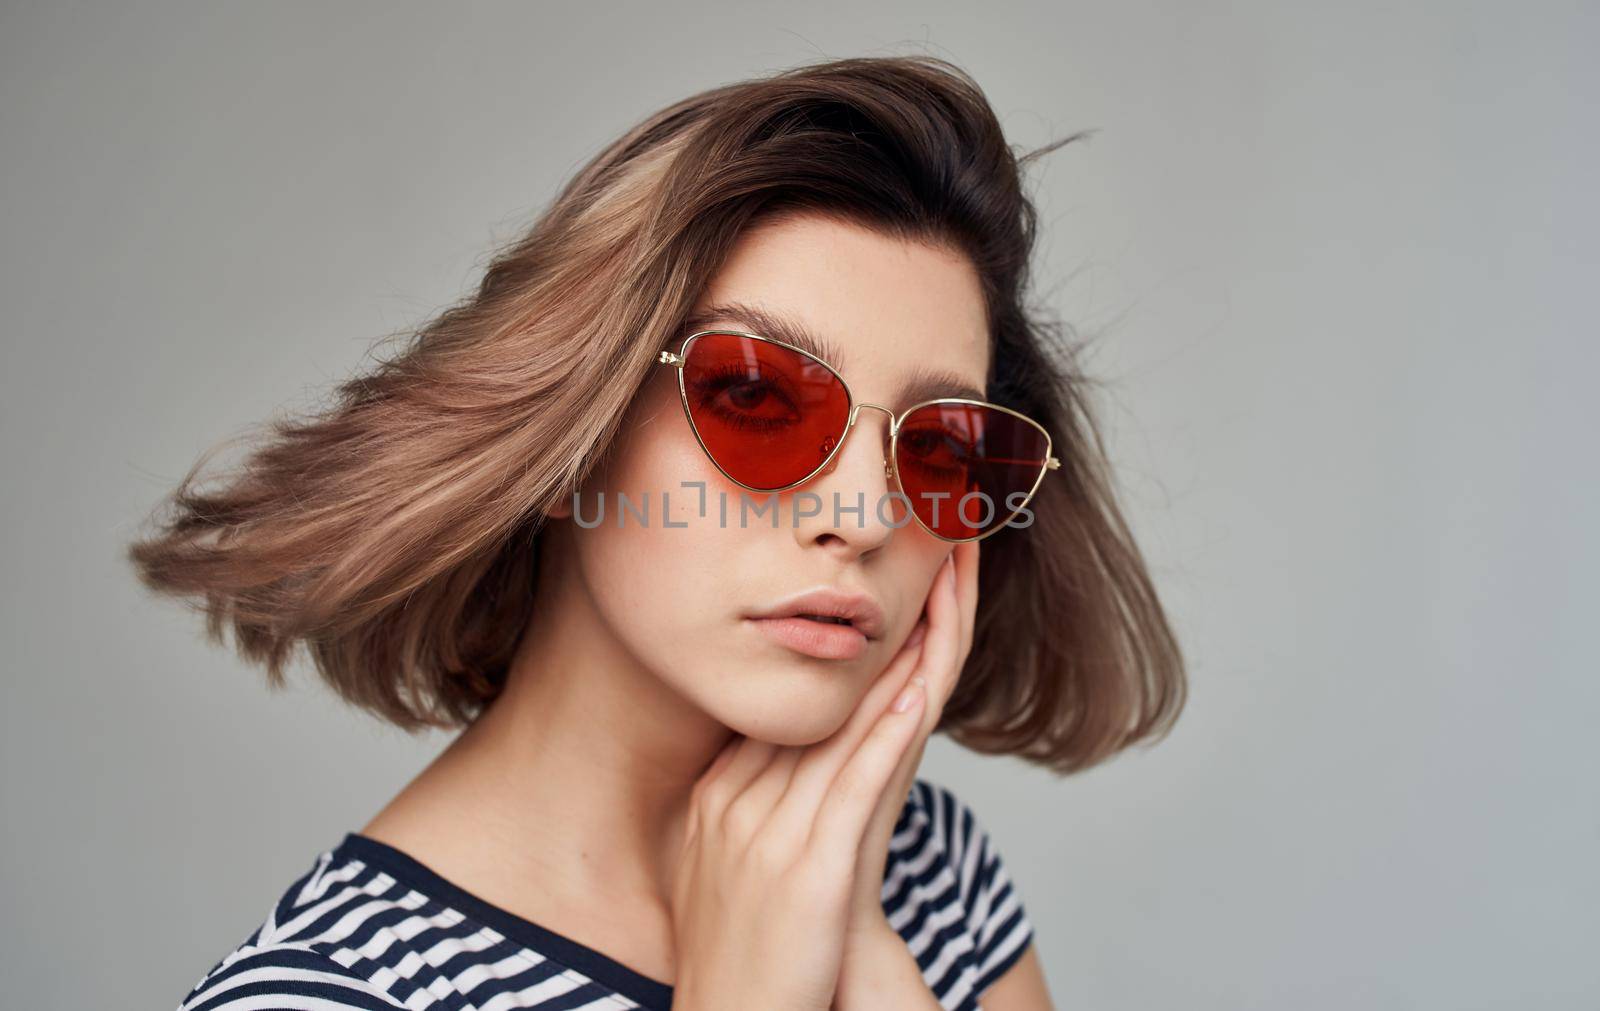 romantic woman in striped t-shirt portrait on gray background and fashionable glasses on face. High quality photo